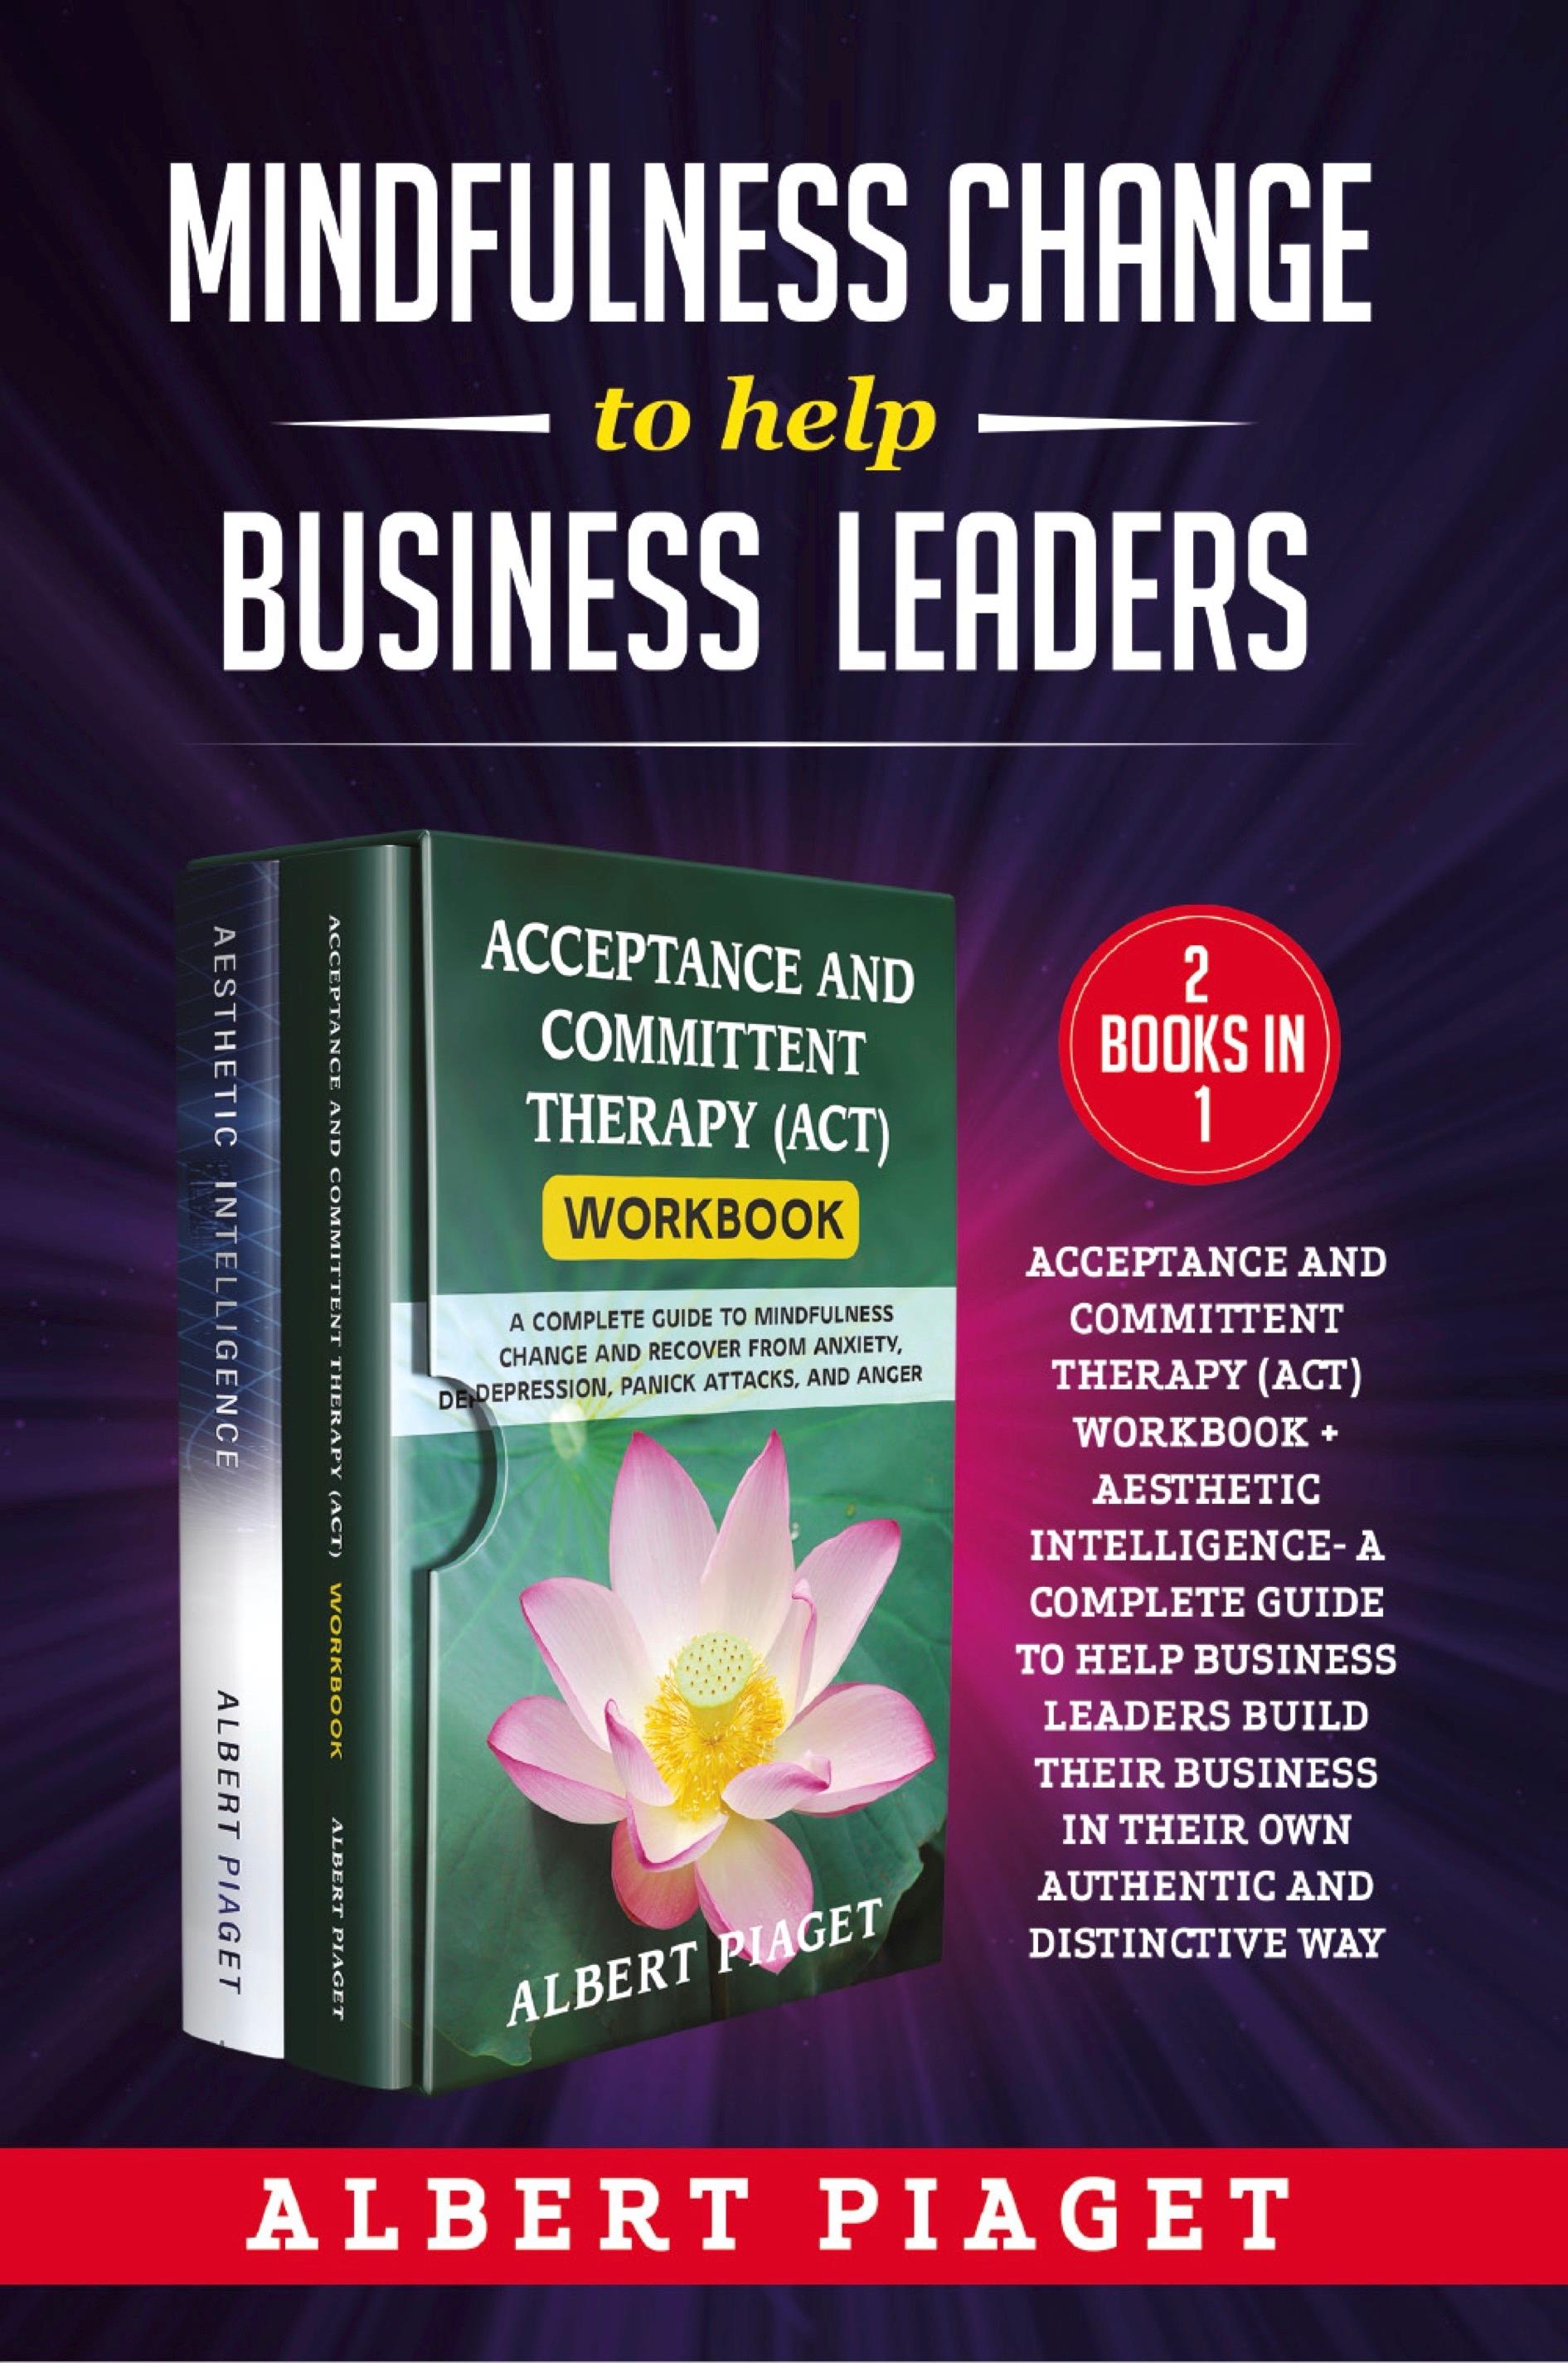 Mindfulness change to help business leaders (2 Books in 1). Acceptance and committent therapy (act) workbook + aesthetic intelligence- a complete guide to help business leaders build their business in their own authentic and distinctive way